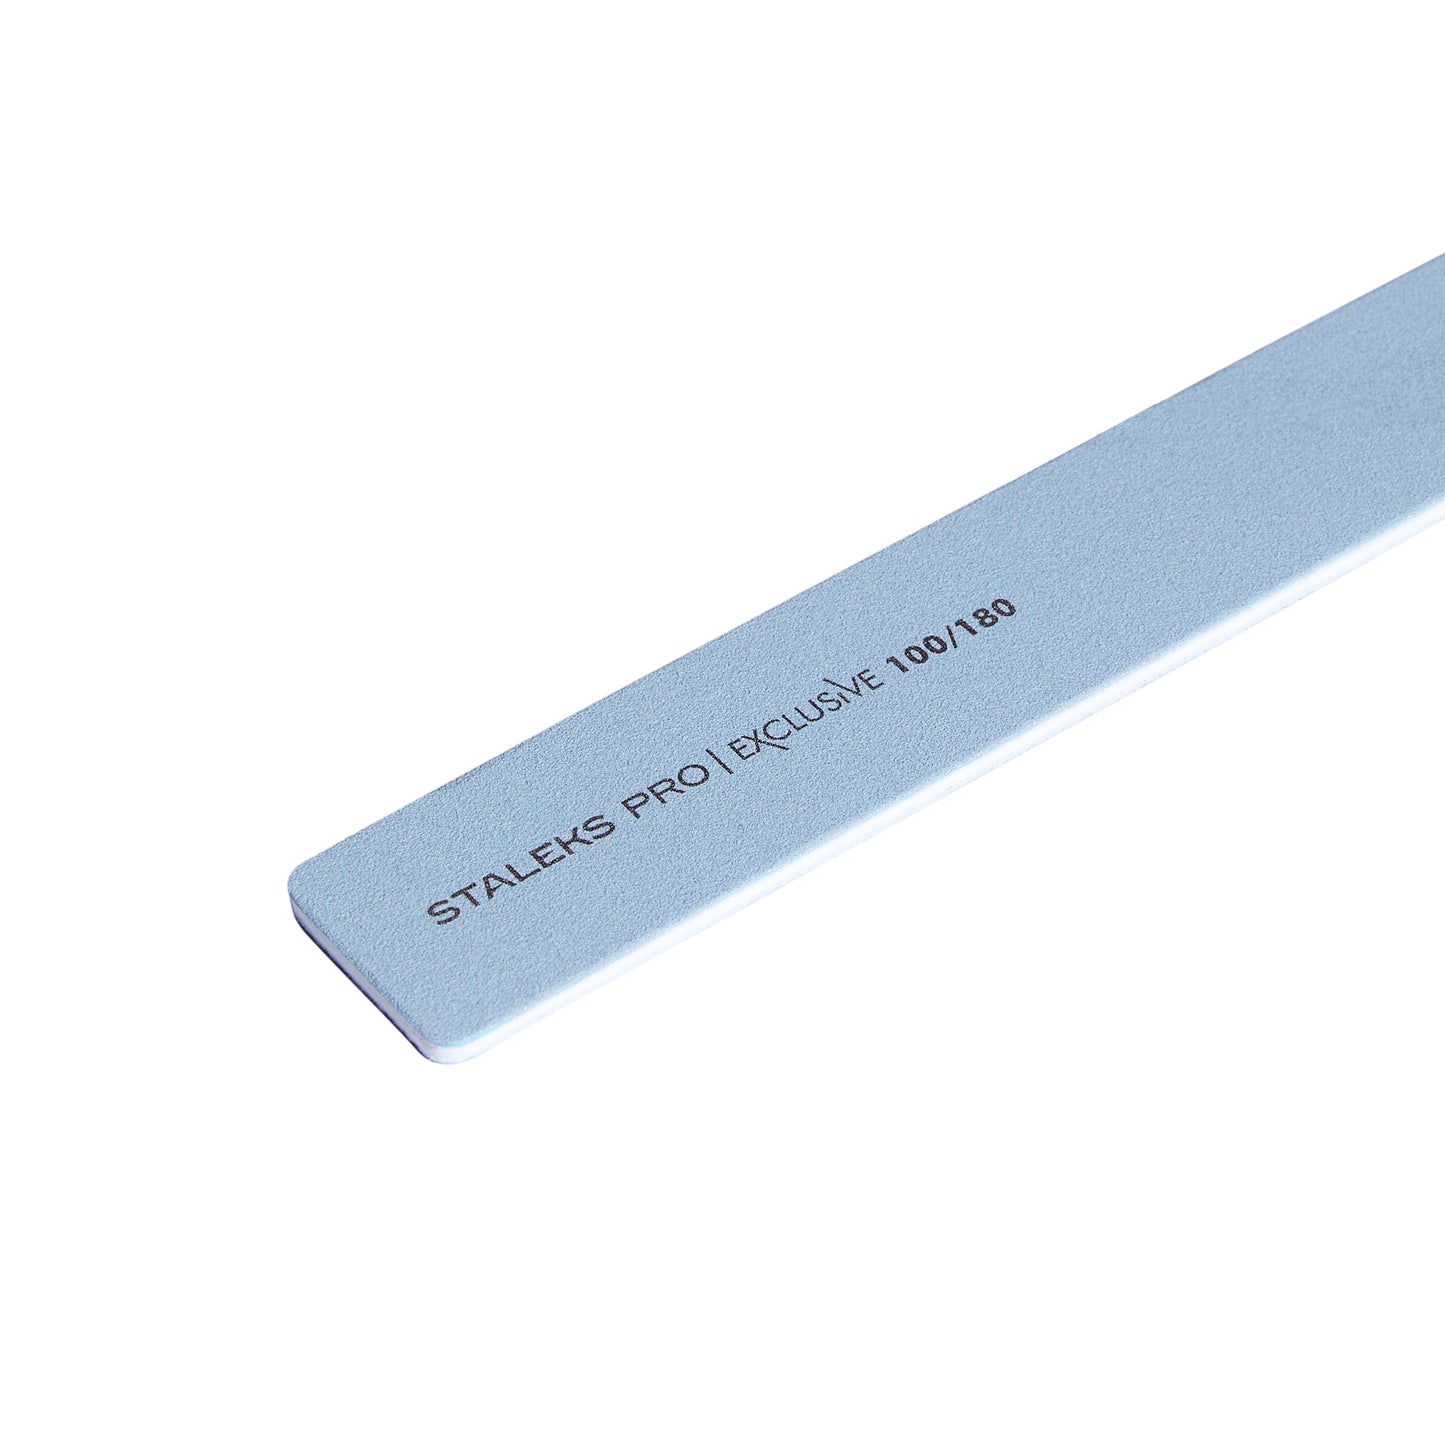 STALEKS-100/180grit Mineral straight nail file EXCLUSIVE-1